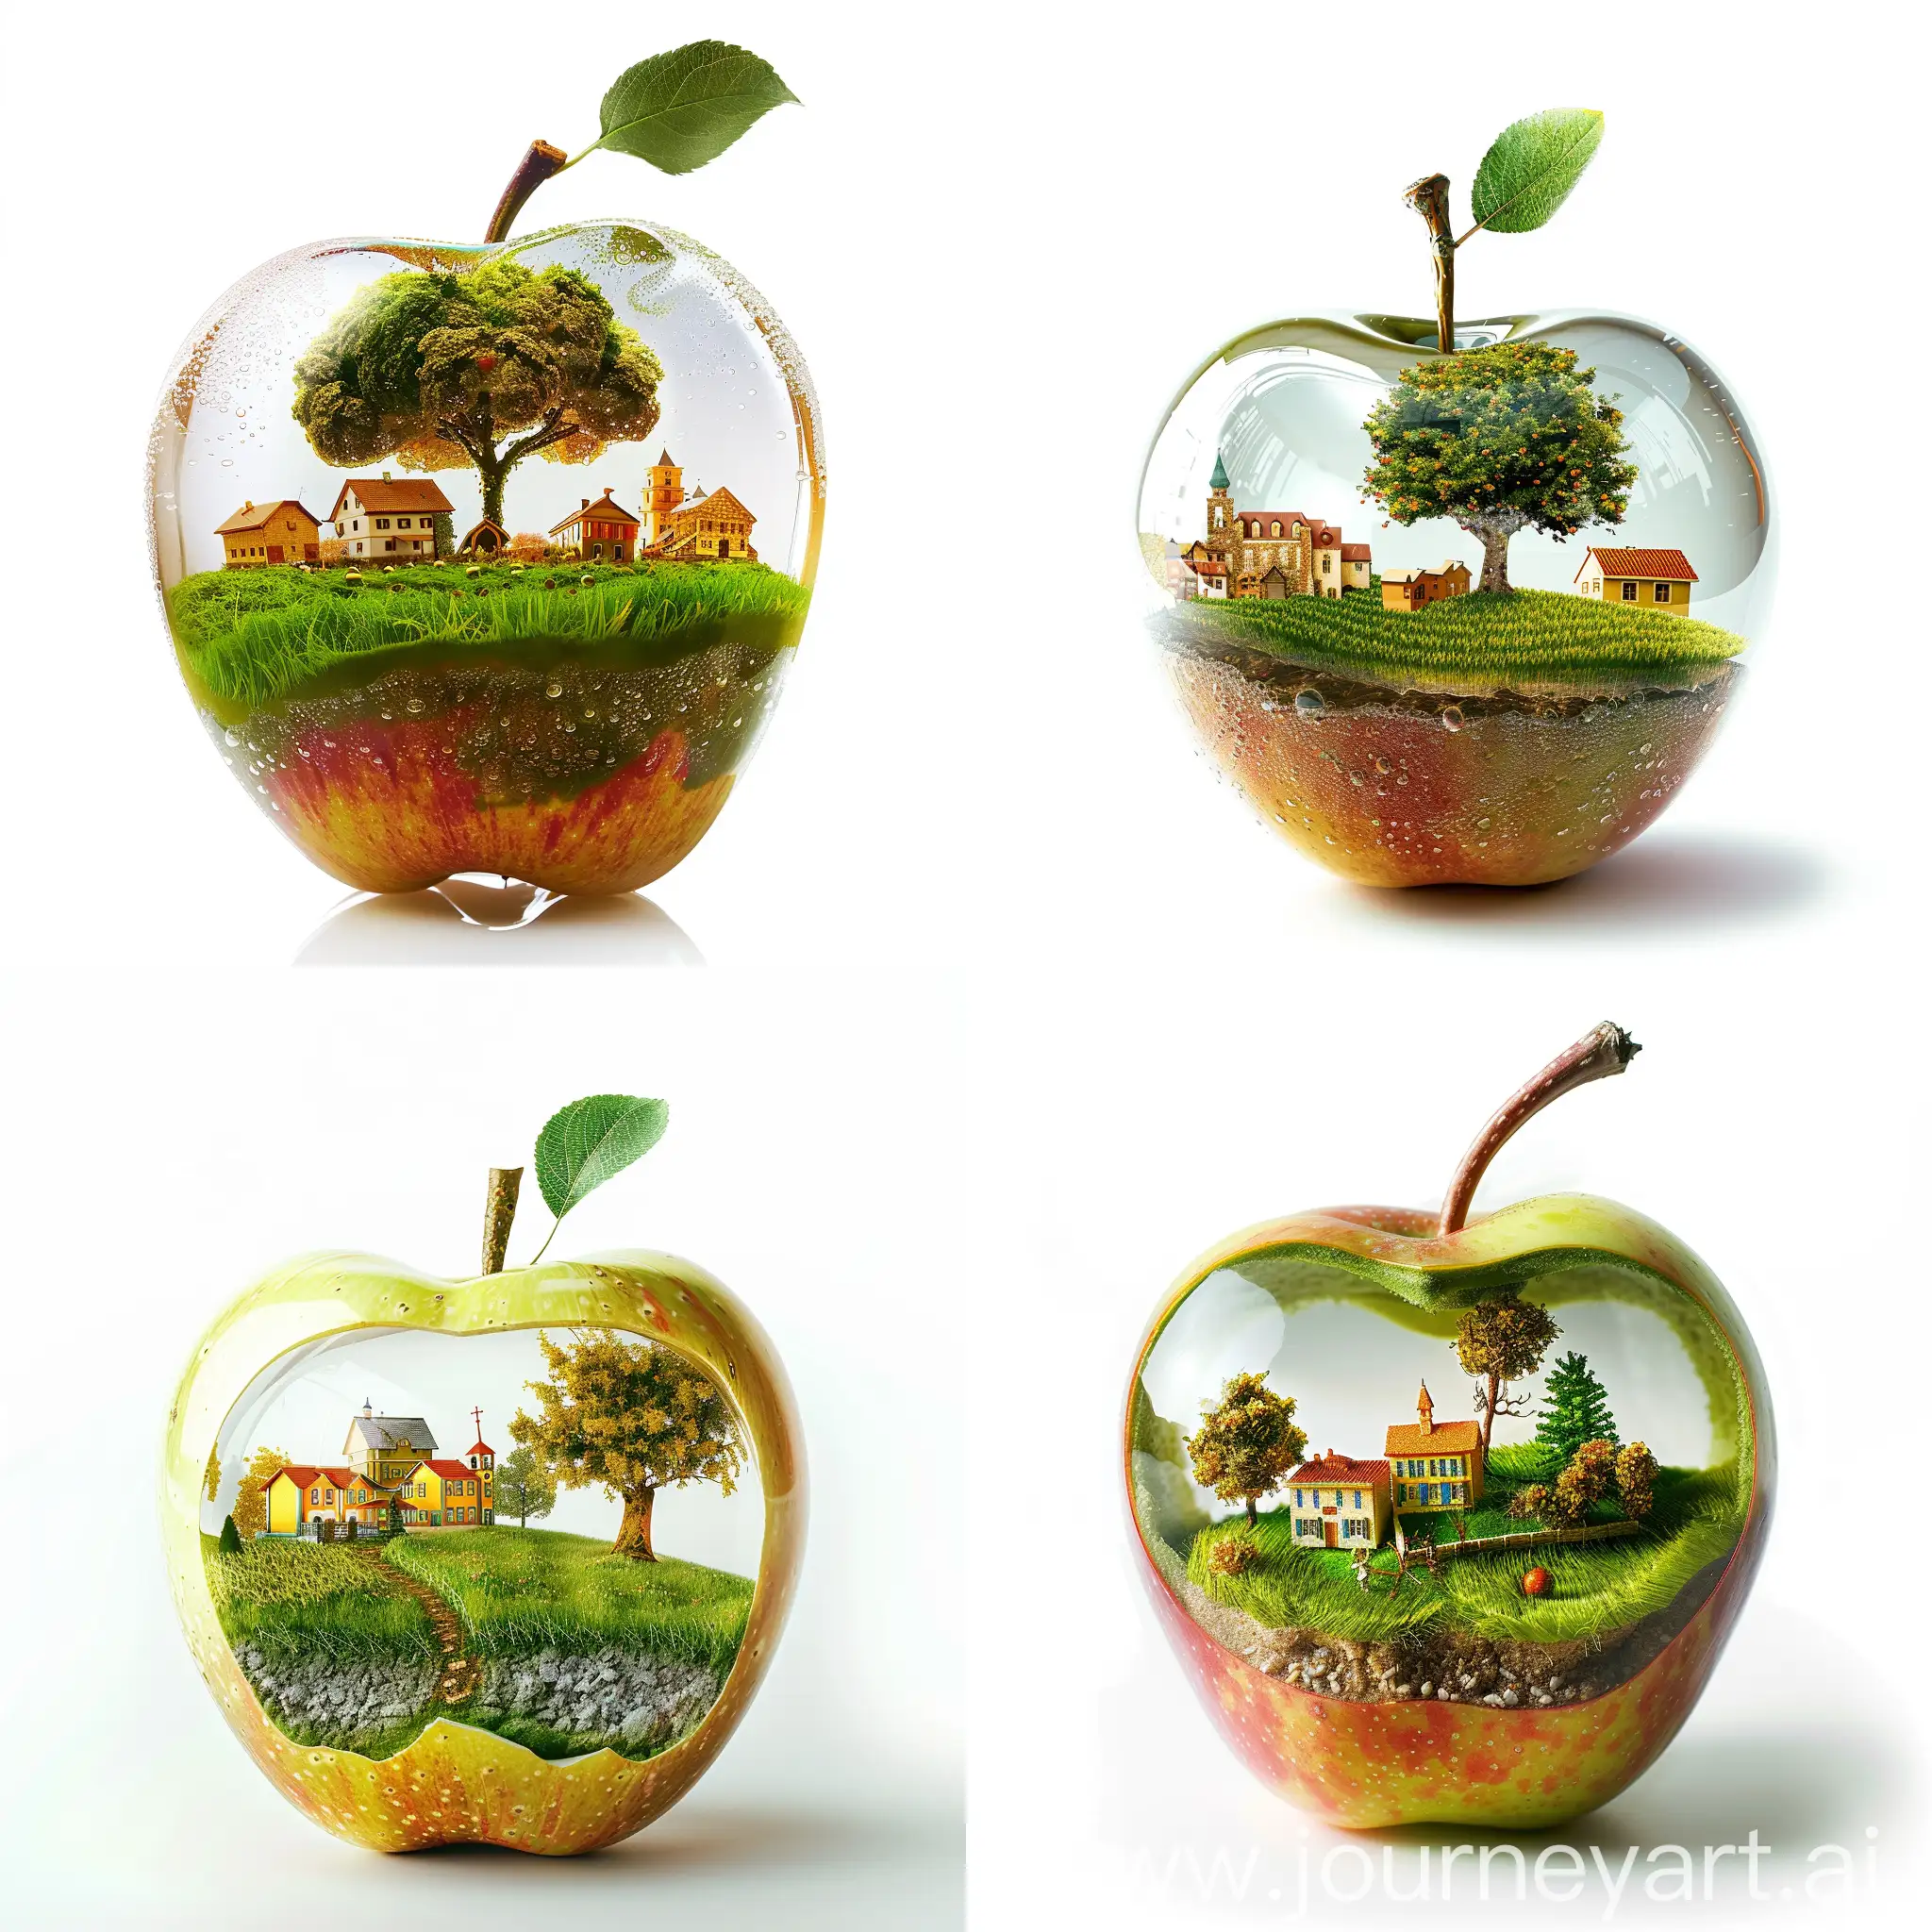 Transparent apple, in the apple a village with green grass and a tree. And holding the apple. White background